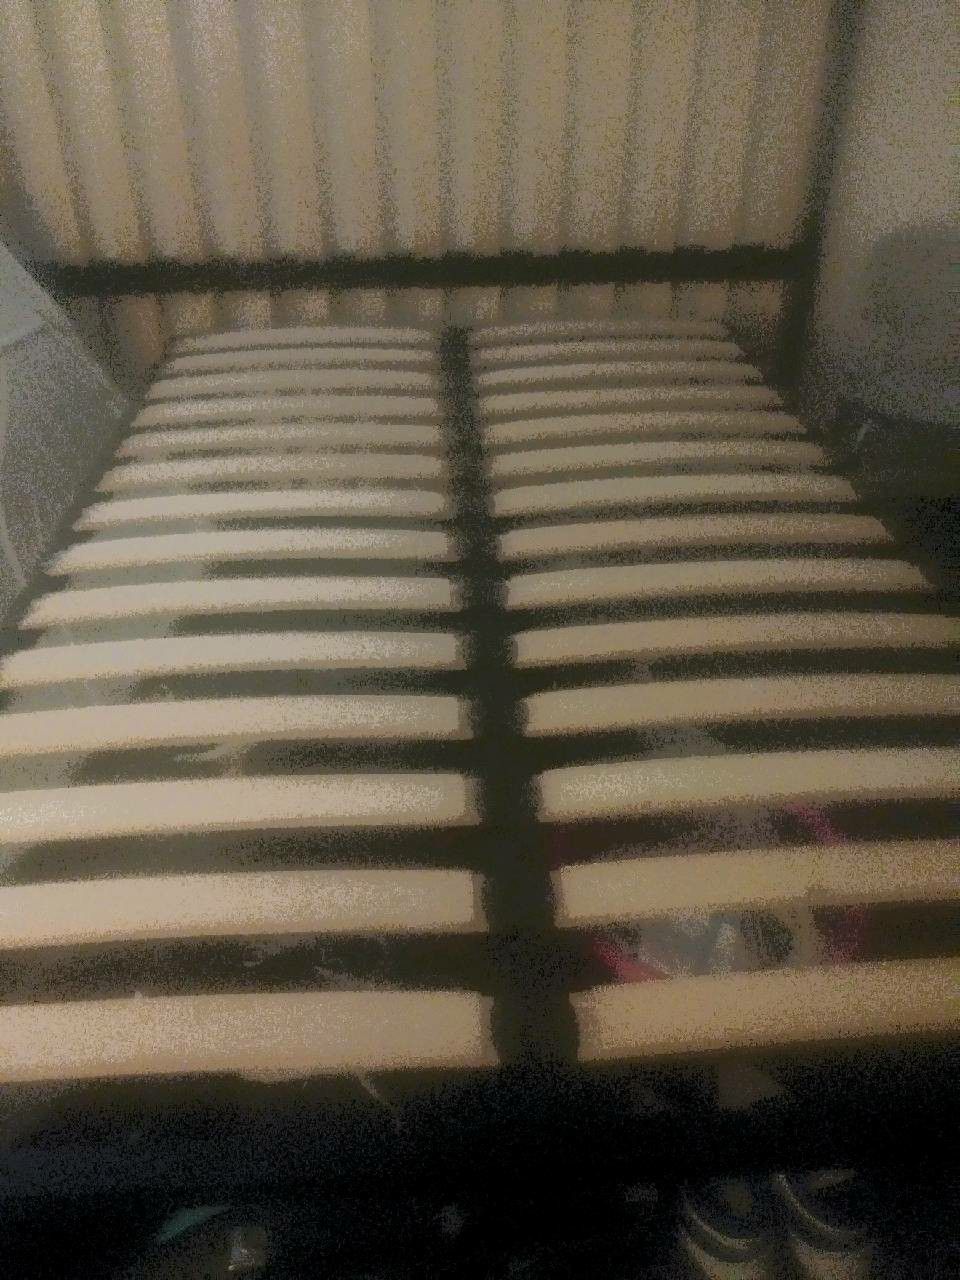 Bed frames... This is two beds not a bed board.